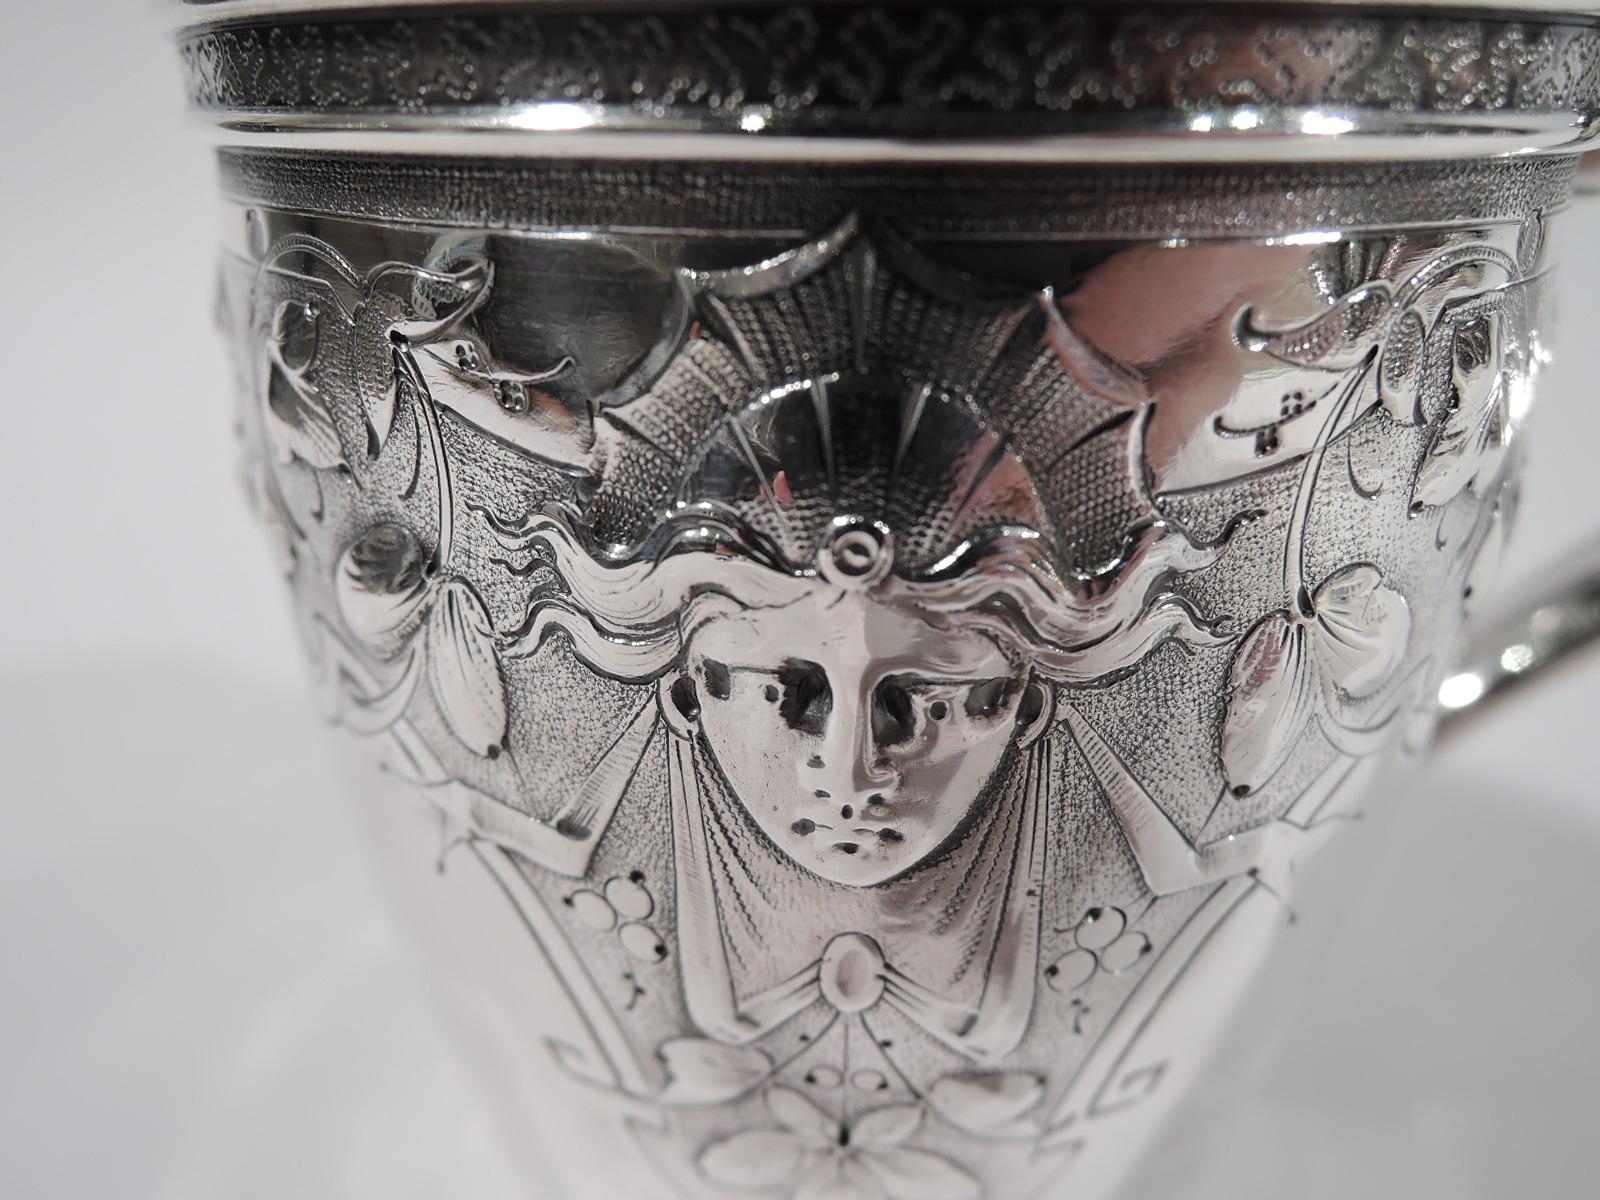 American Classical Philadelphia Classical Coin Silver Baby Cup by Krider & Biddle